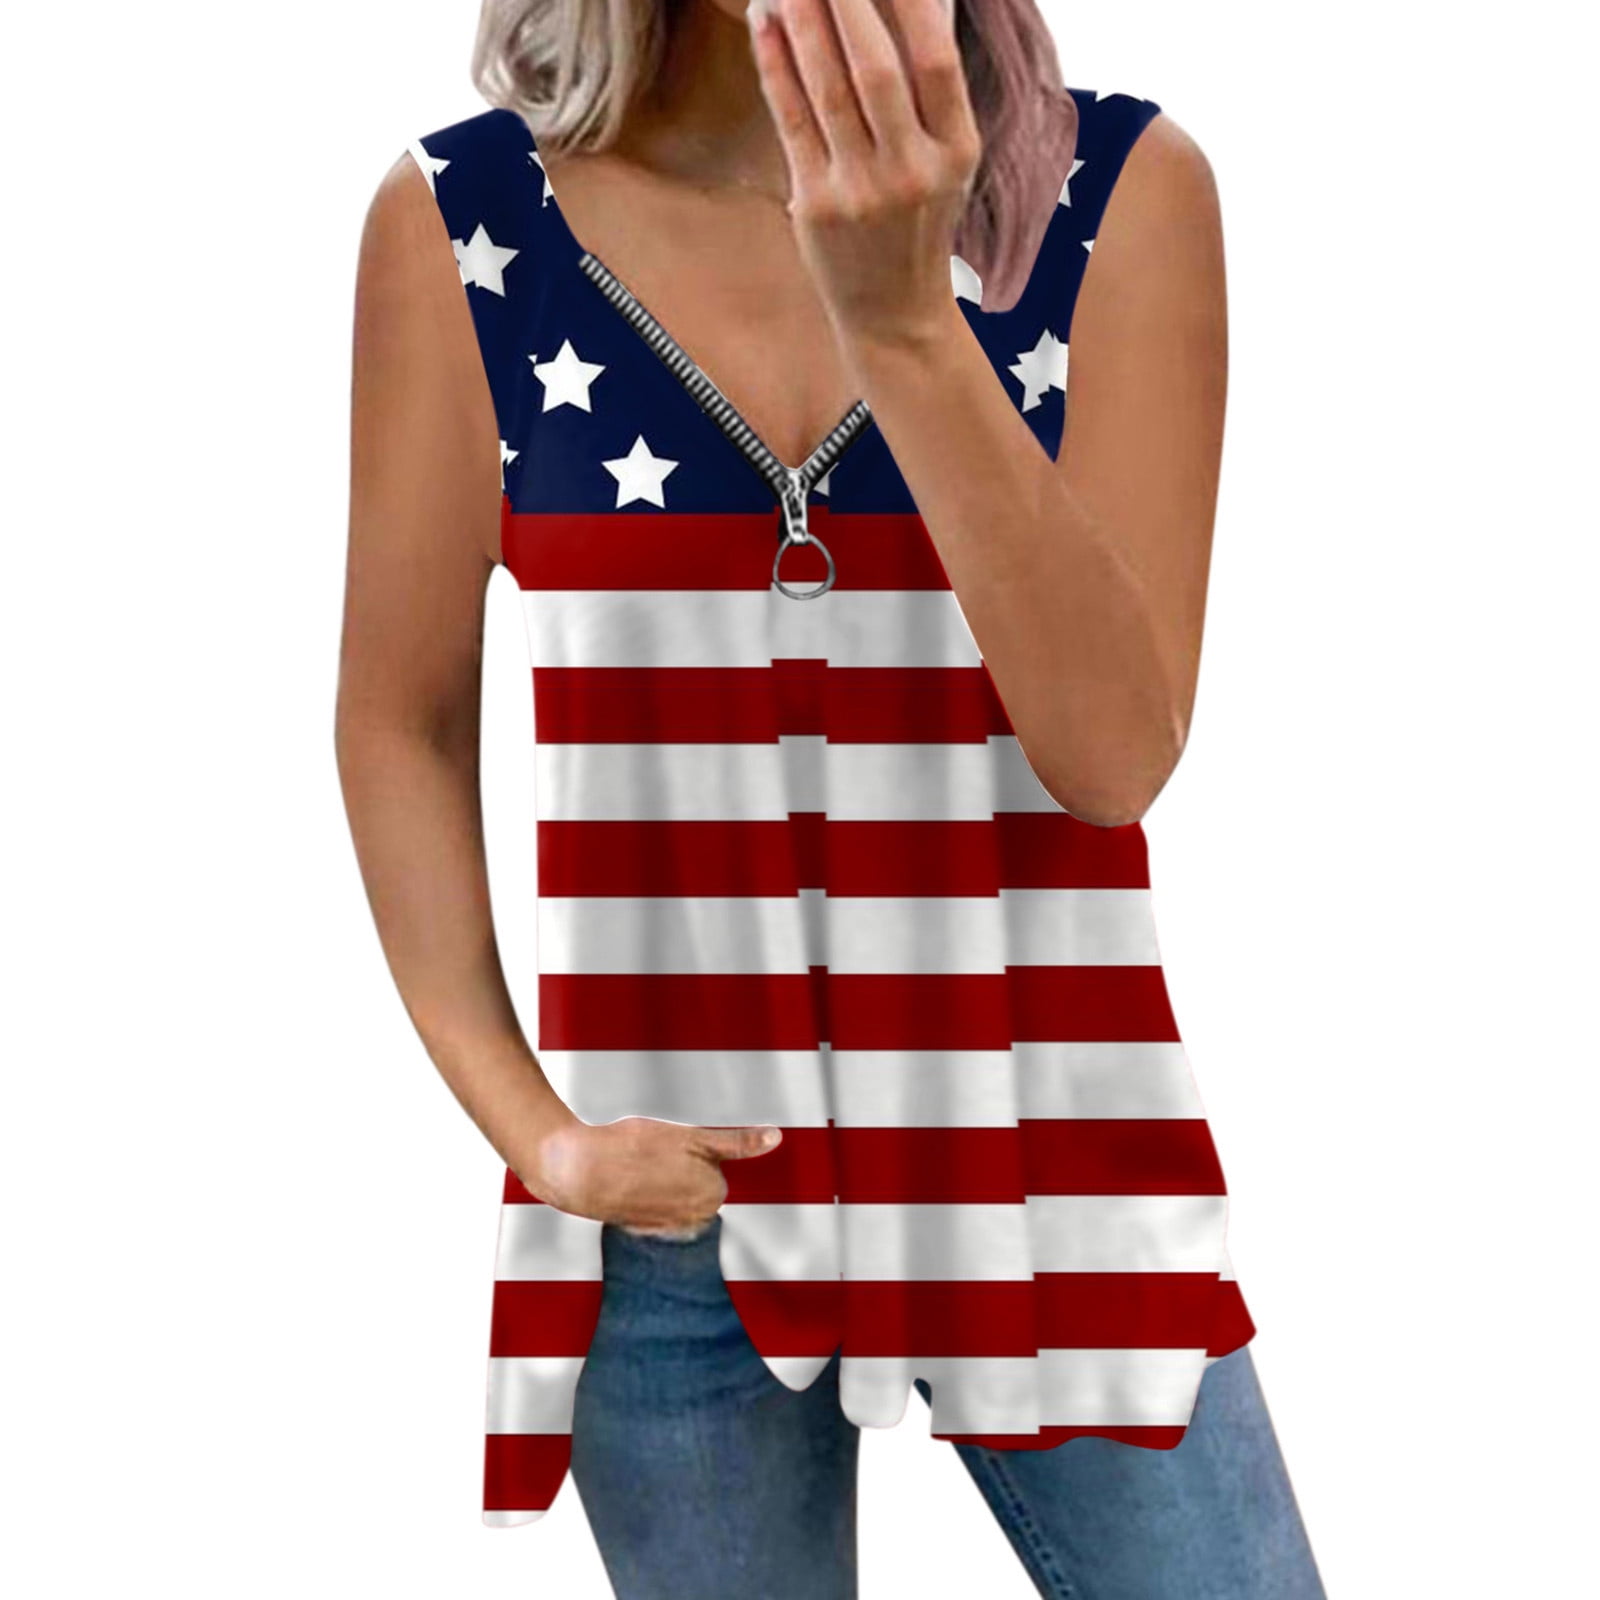 Comfortable Sport Vest Tank Top Yoga Woman American Flag Print Tops Independence Day Racerback Sleeveless Toponly 